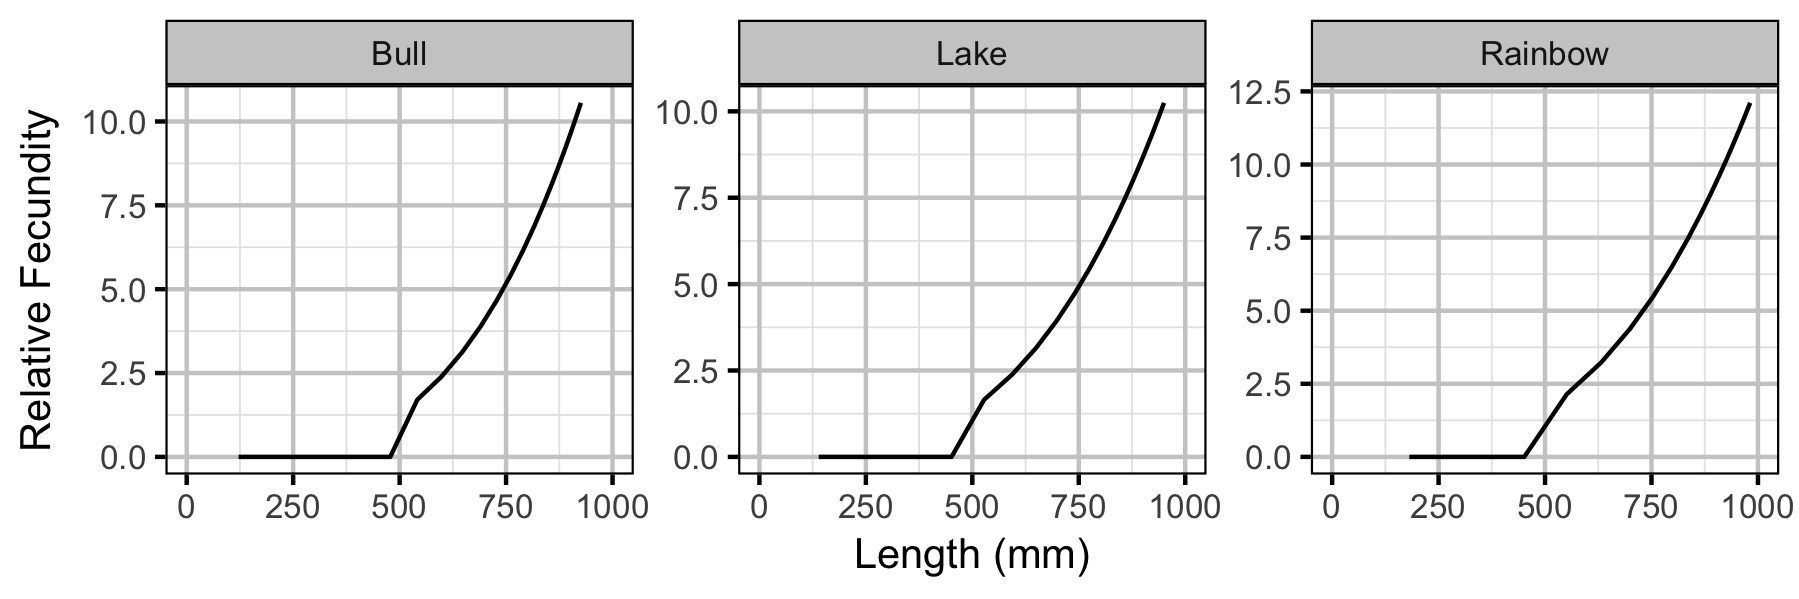 figures/yield/fecundity_length.png